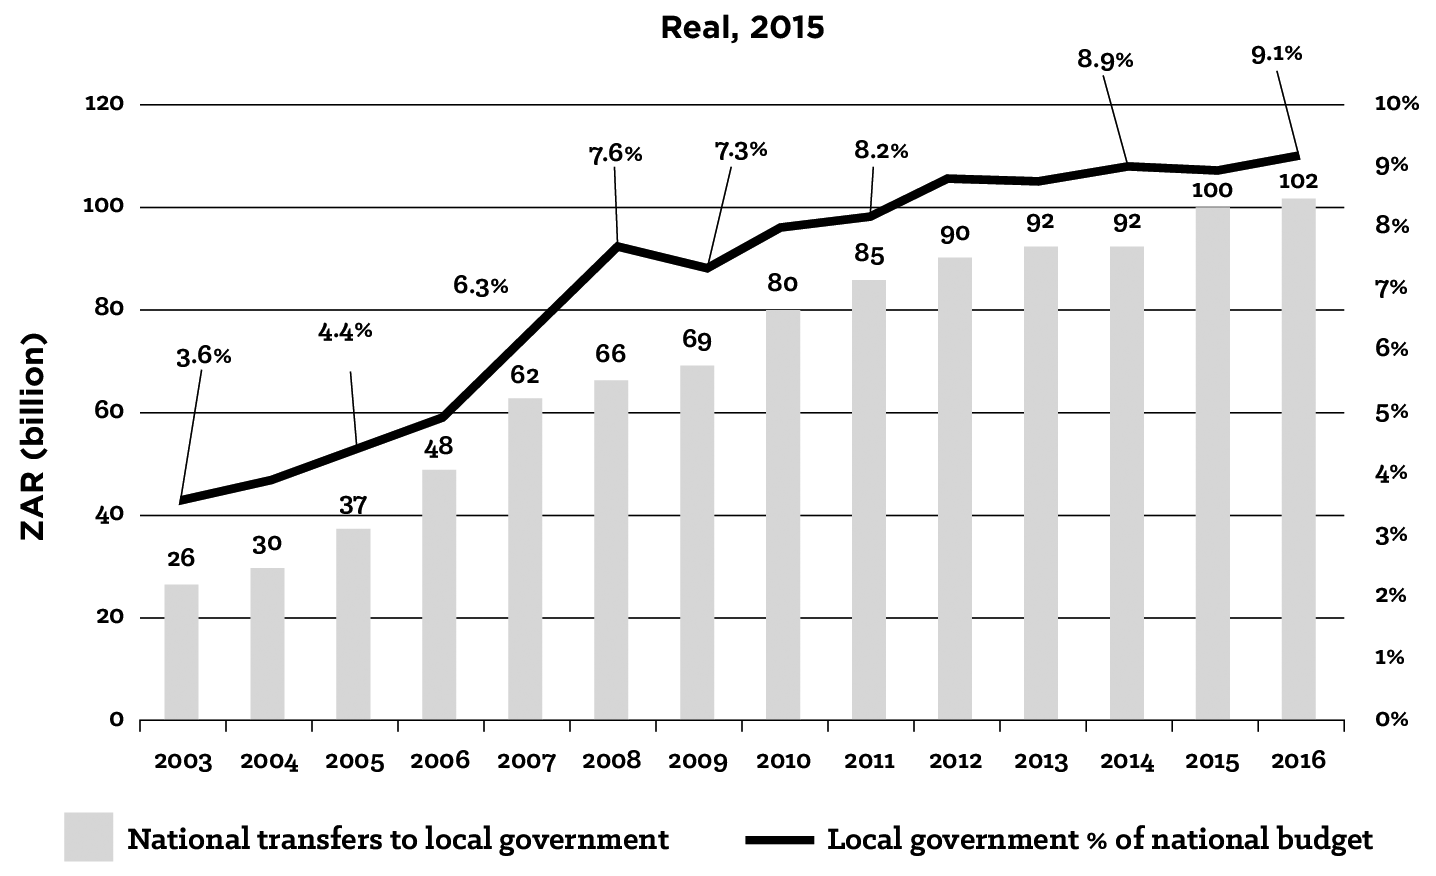 Figure 3.1: National Transfers to Local Government (2003 to 2016)